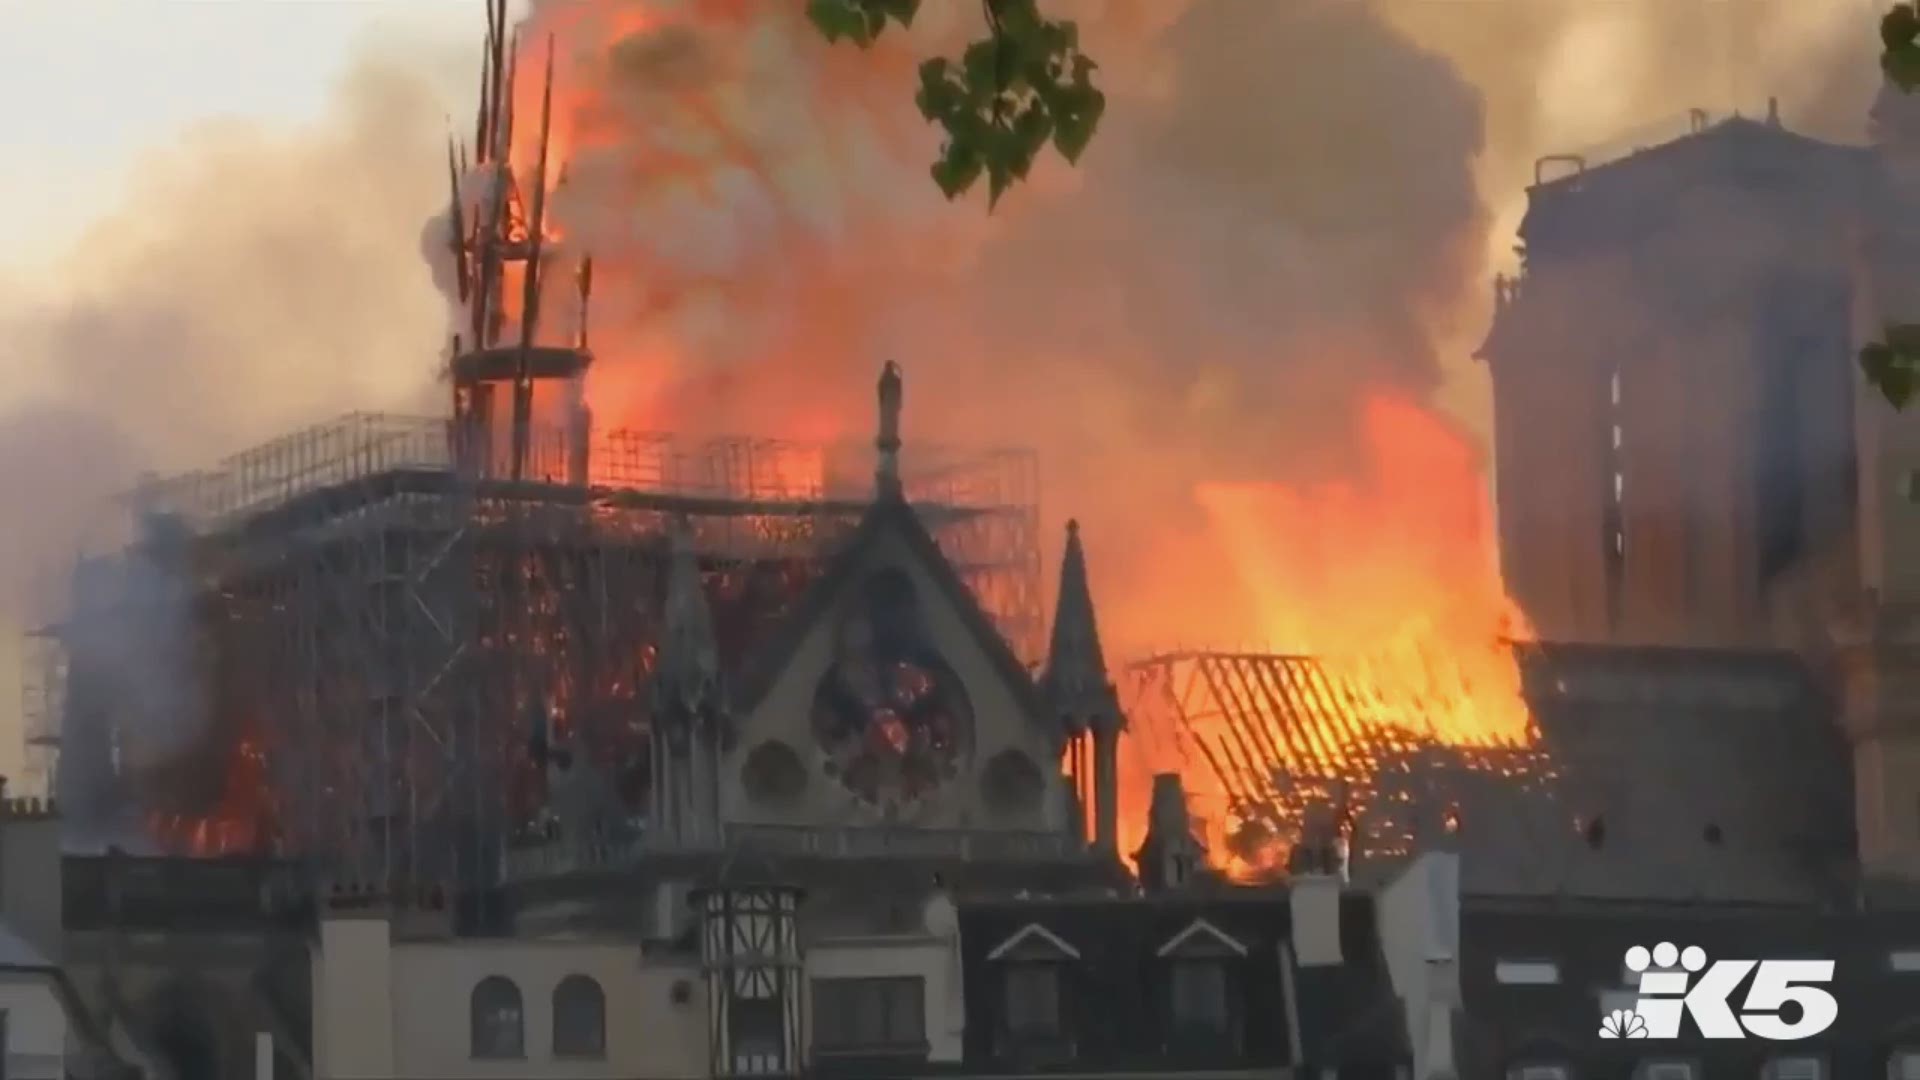 St. James Cathedral in Seattle rang its bells in a show of support after fire at Notre Dame Cathedral.